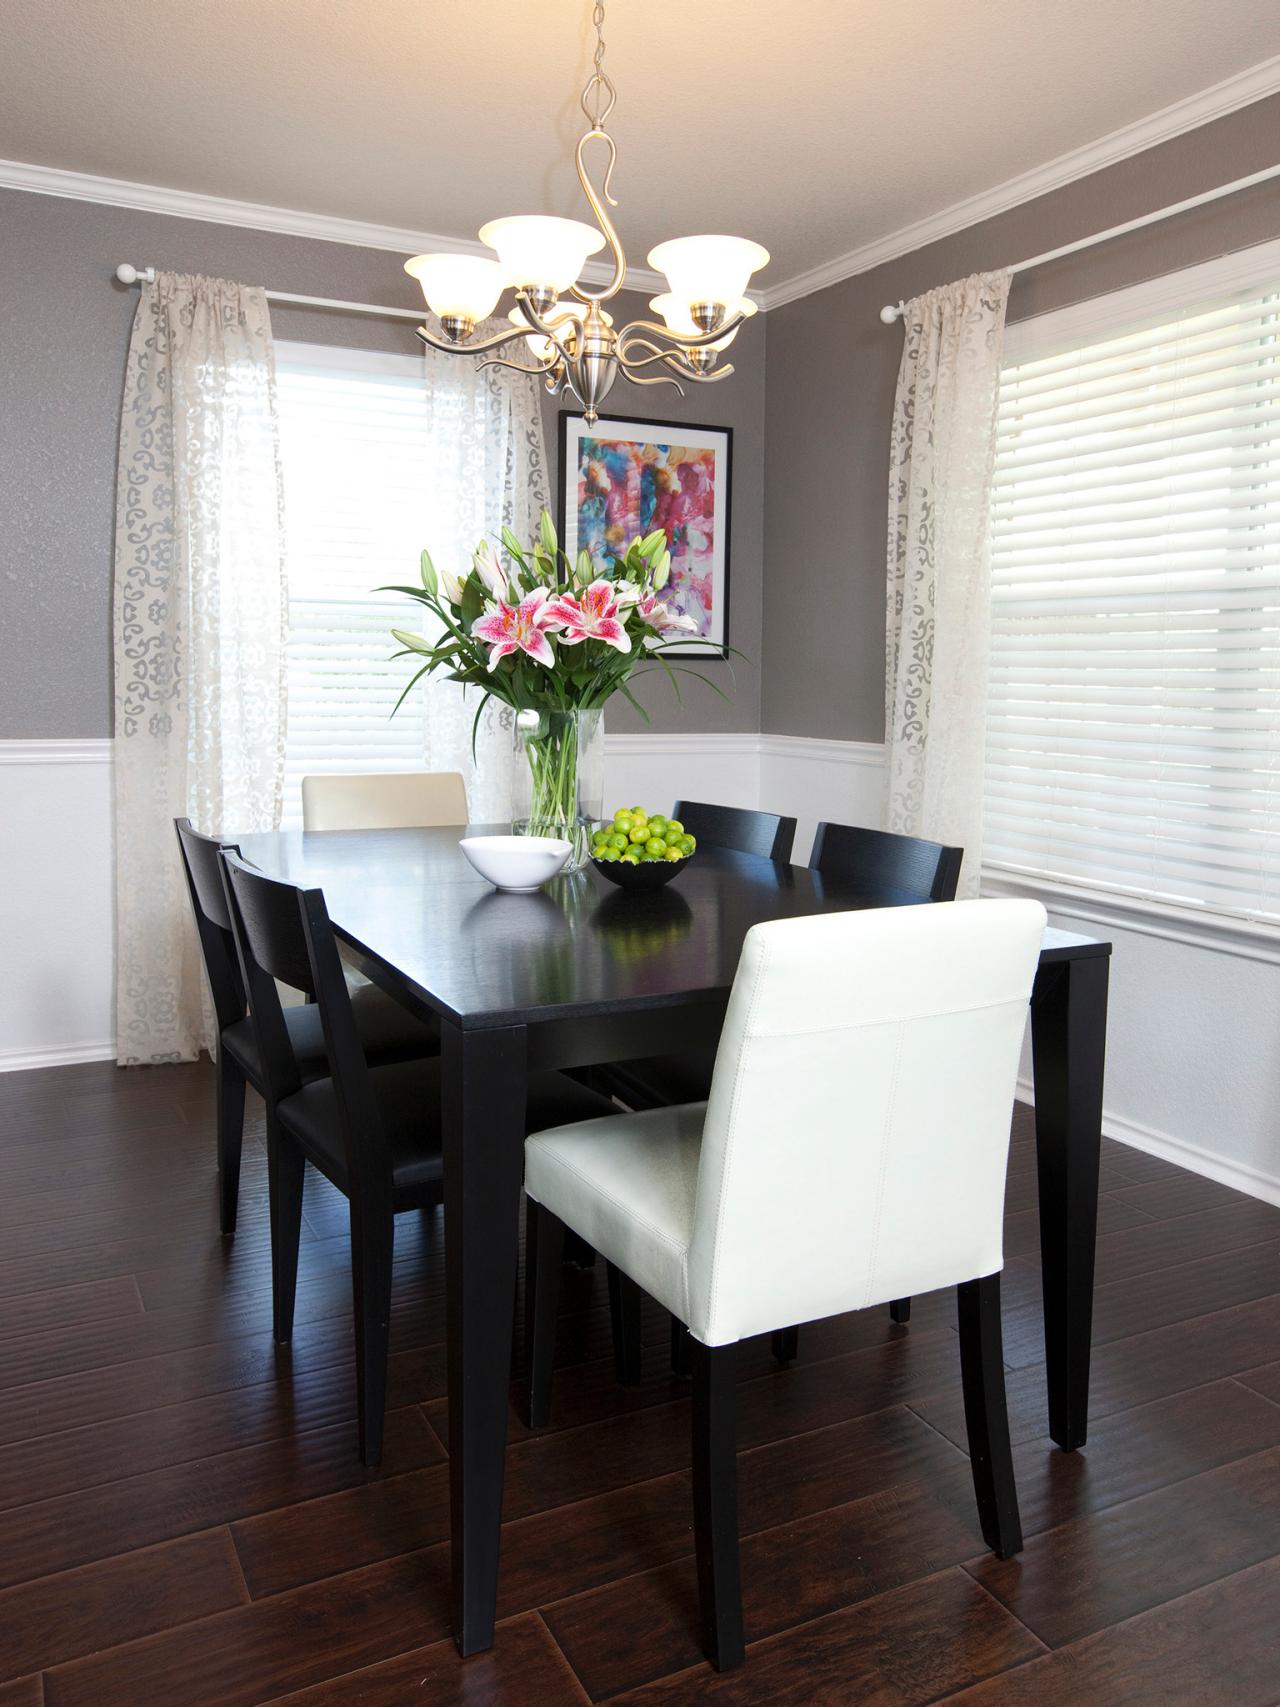 Transitional Gray Dining Room With White Accents | HGTV